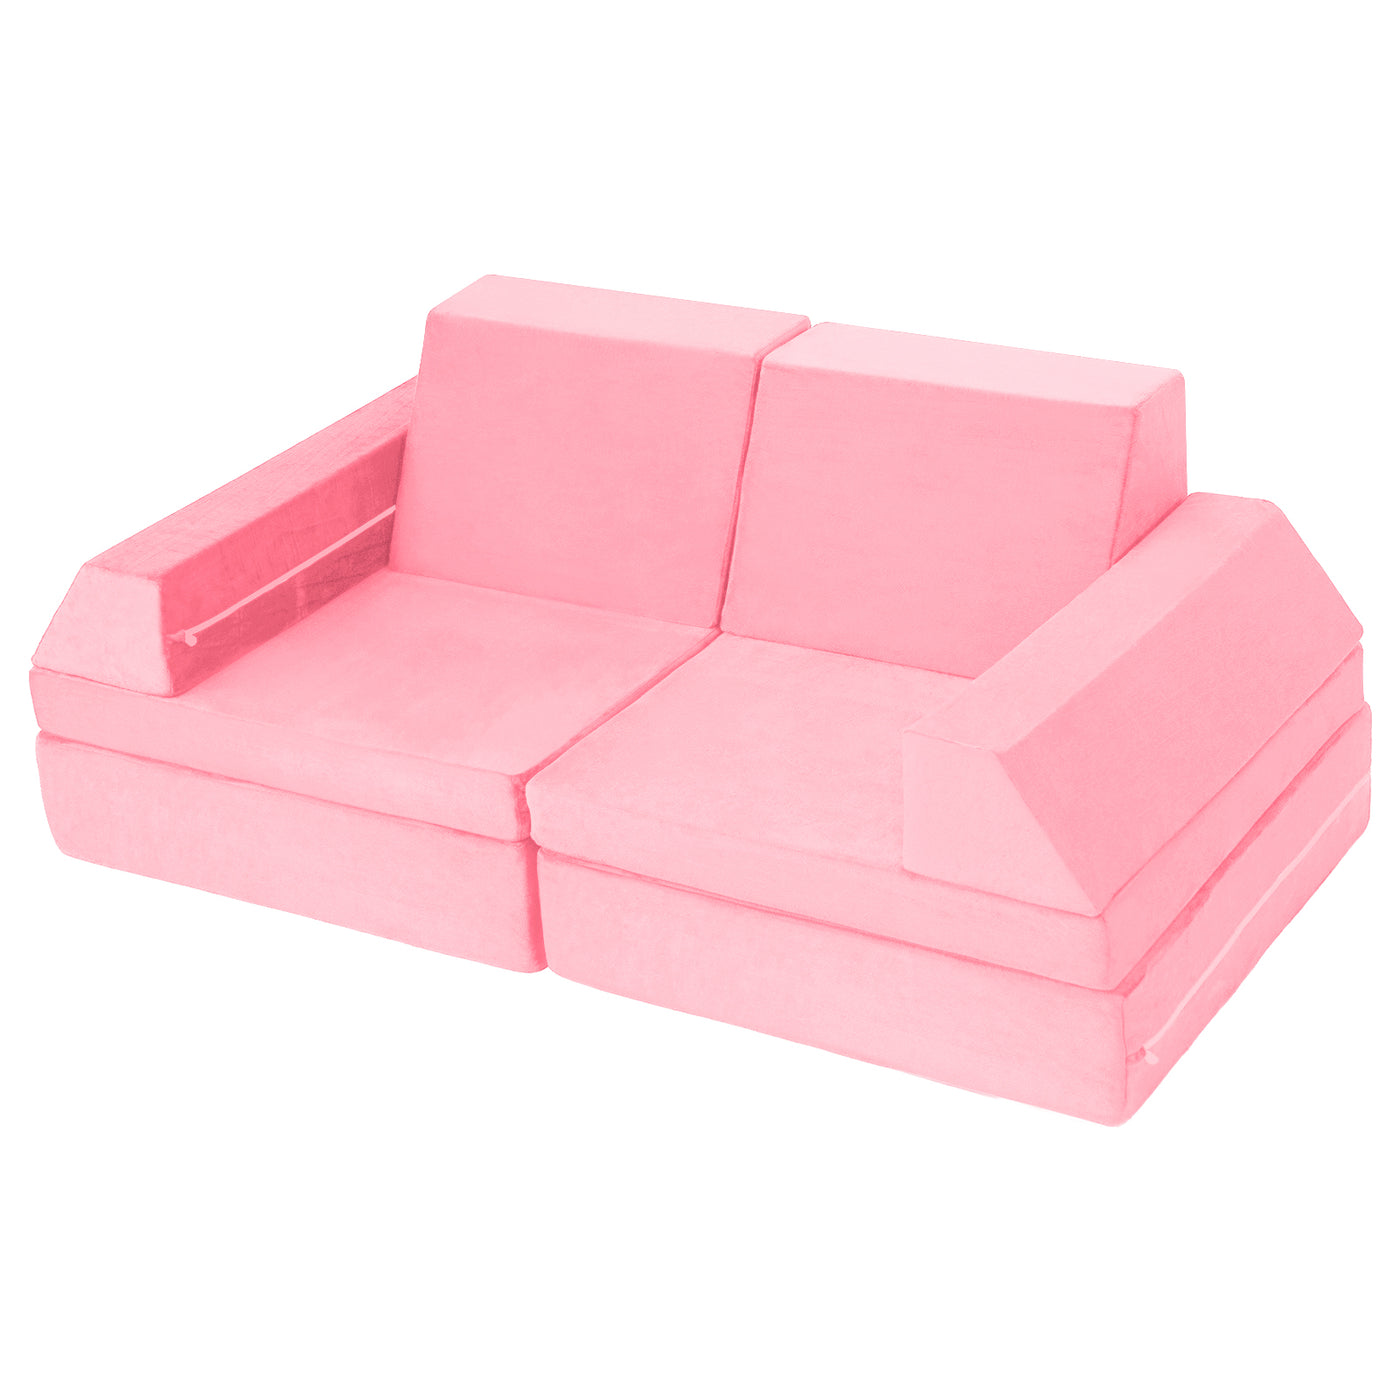 10-Piece Modular Convertible Kids Play Couch Sofa Set with Removable Velvet Covers (Pink)